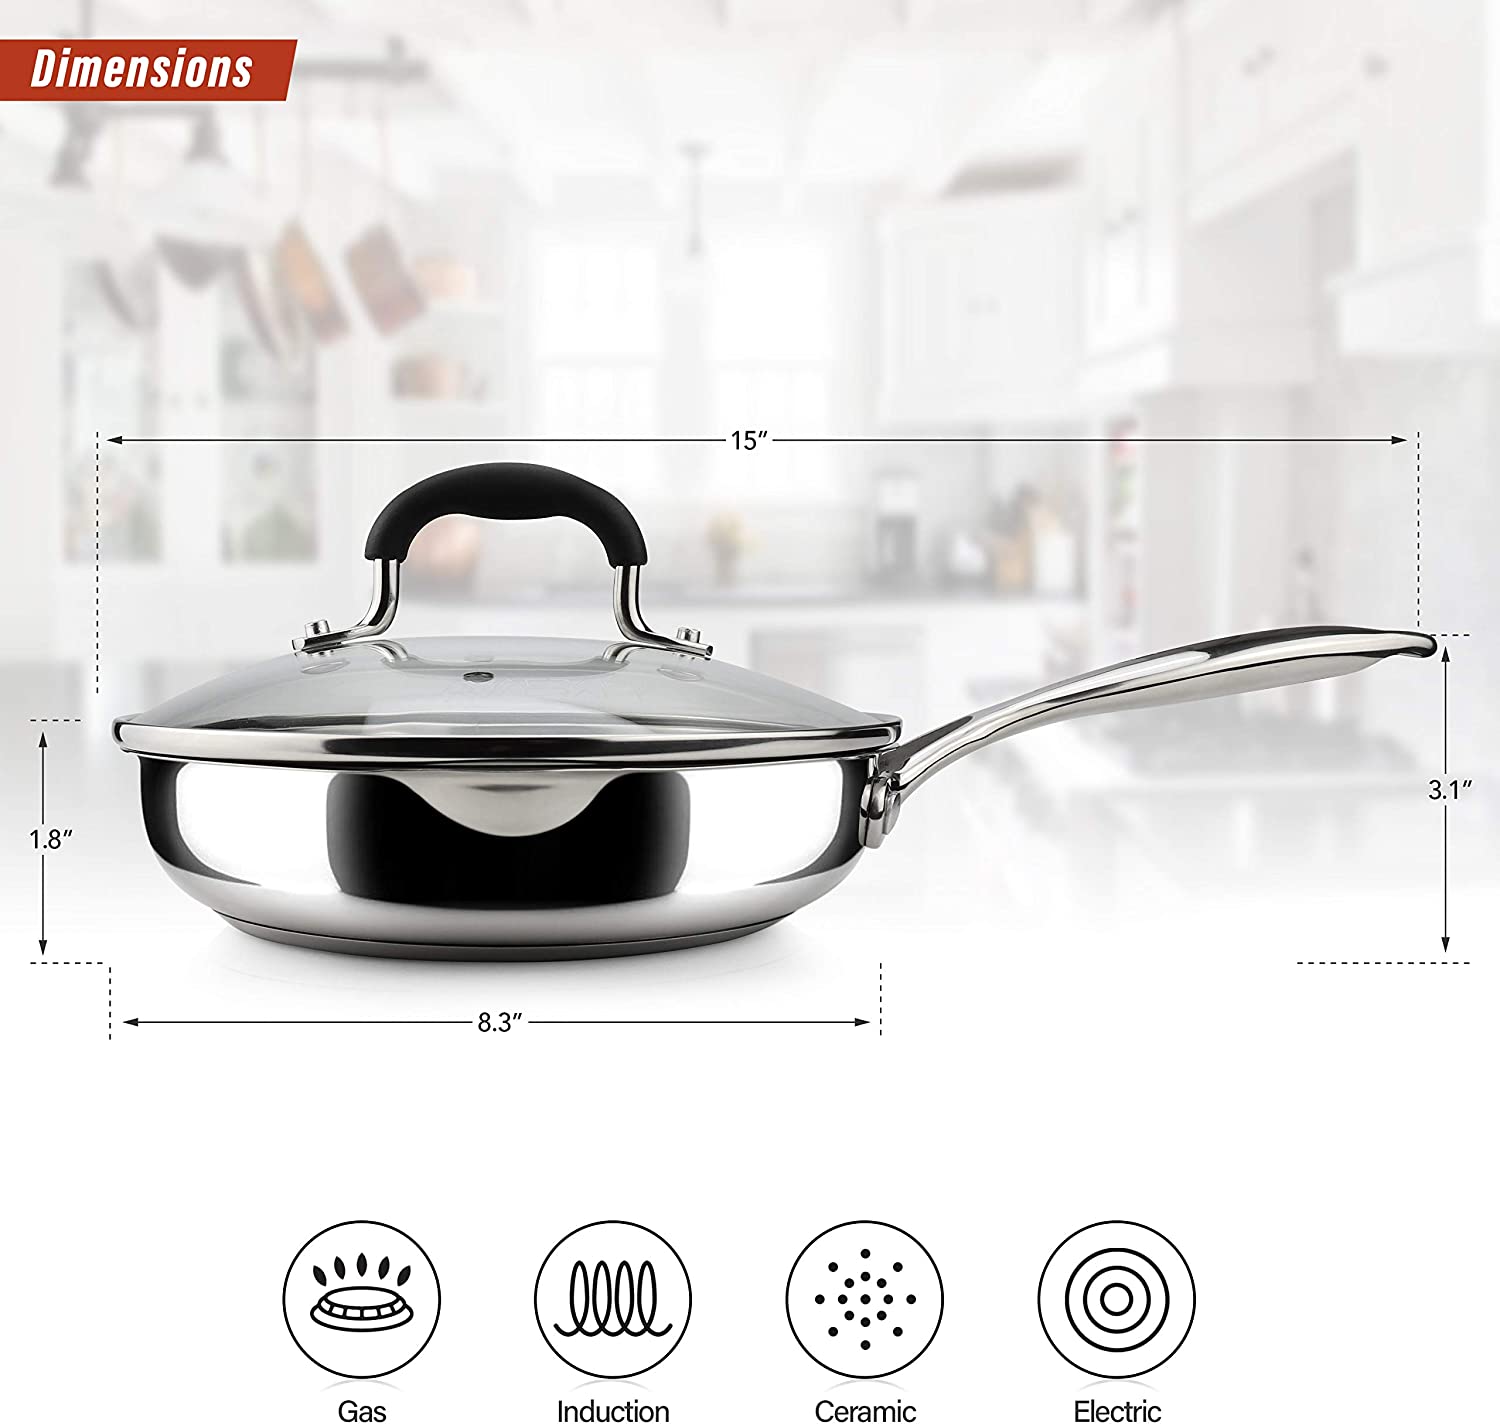 AVACRAFT 18/10 10 Inch Stainless Steel Frying Pan with Lid, Side Spouts,  Induction Pan, Versatile Stainless Steel Skillet, Fry Pan in our Pots and